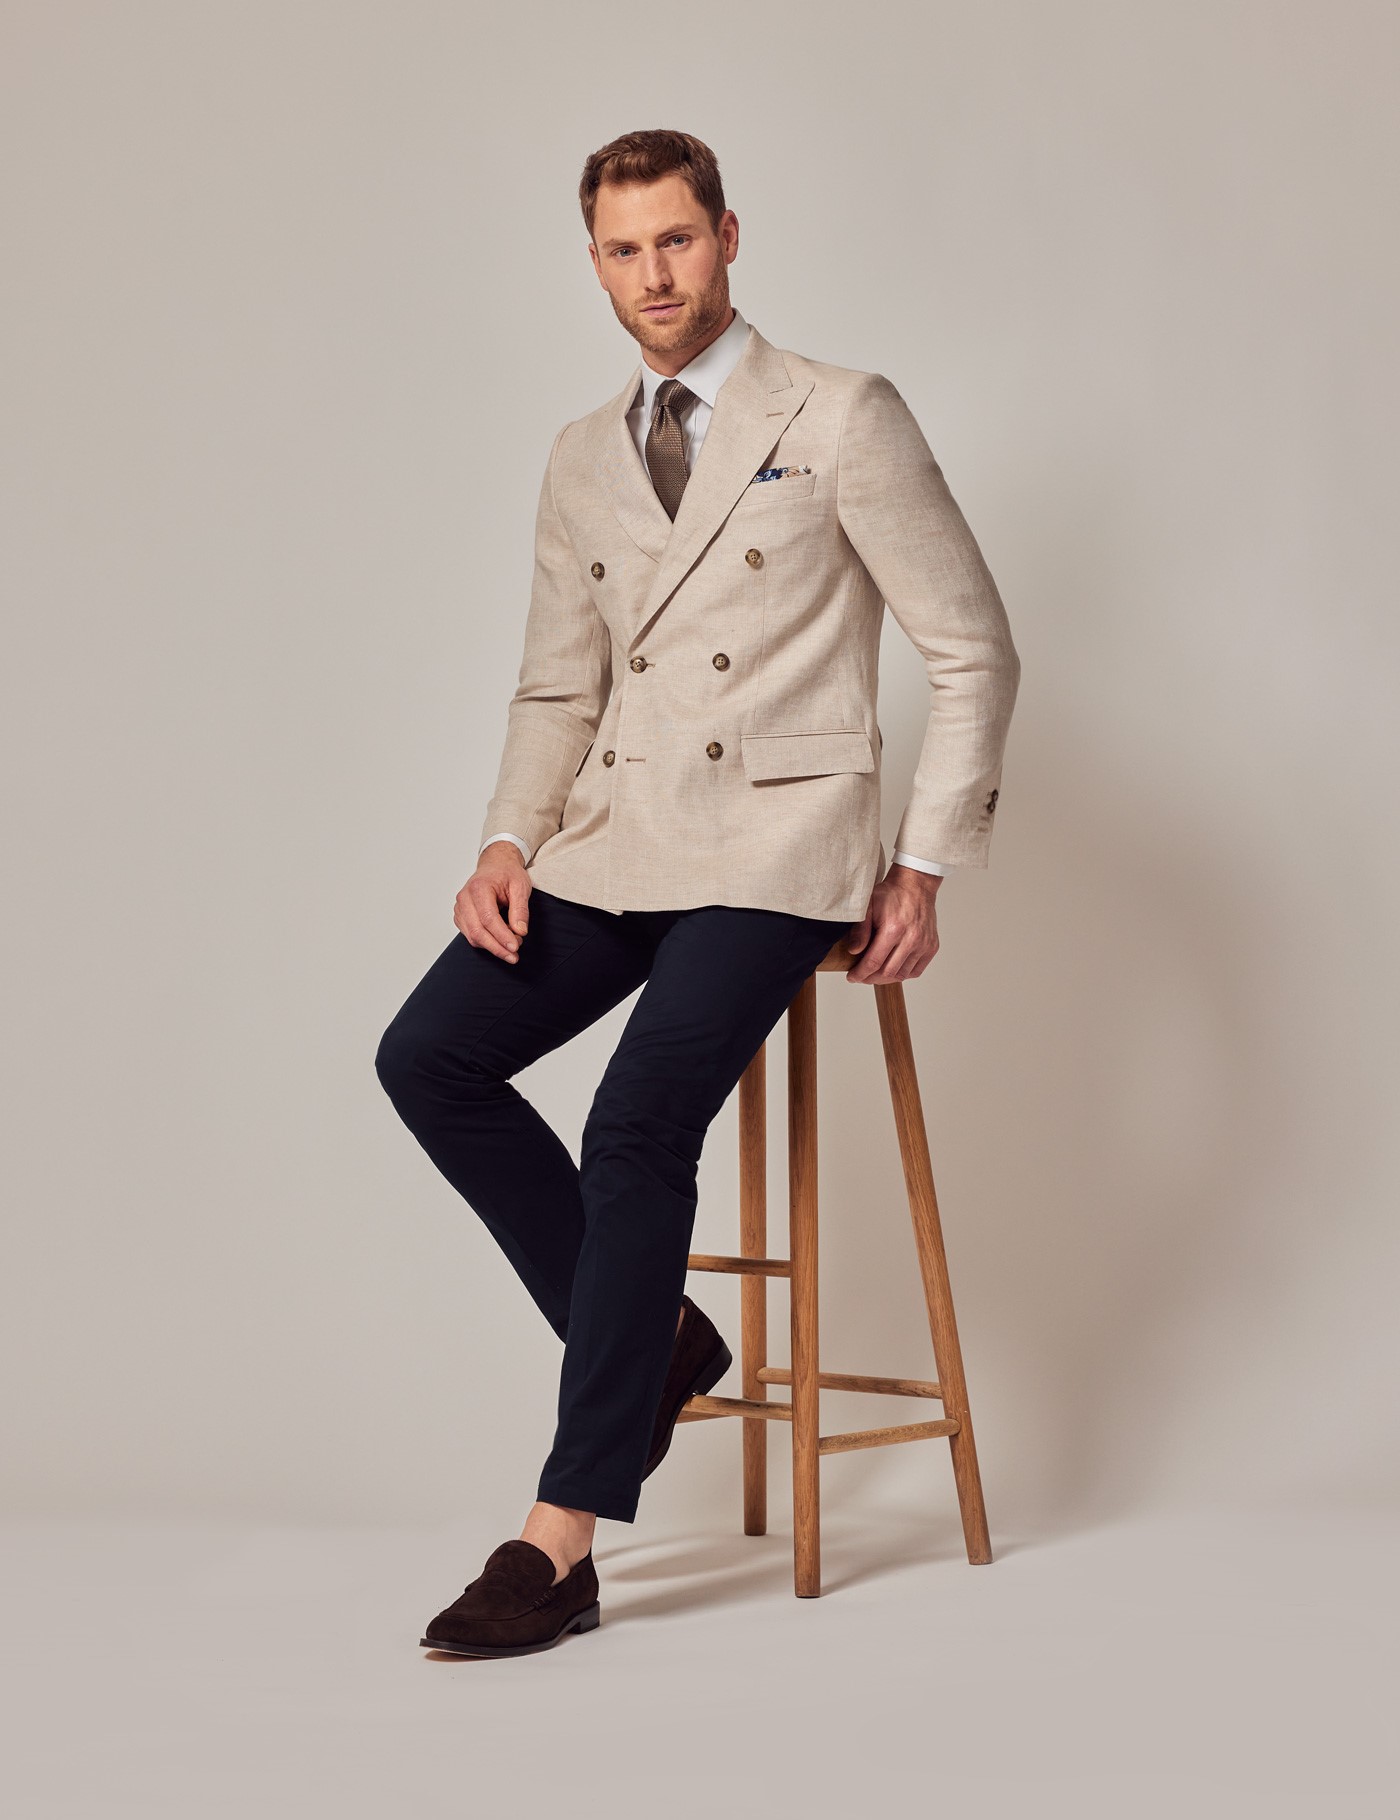 Sewing A Blazer: 8 Must-Know Tips For The Perfect Jacket